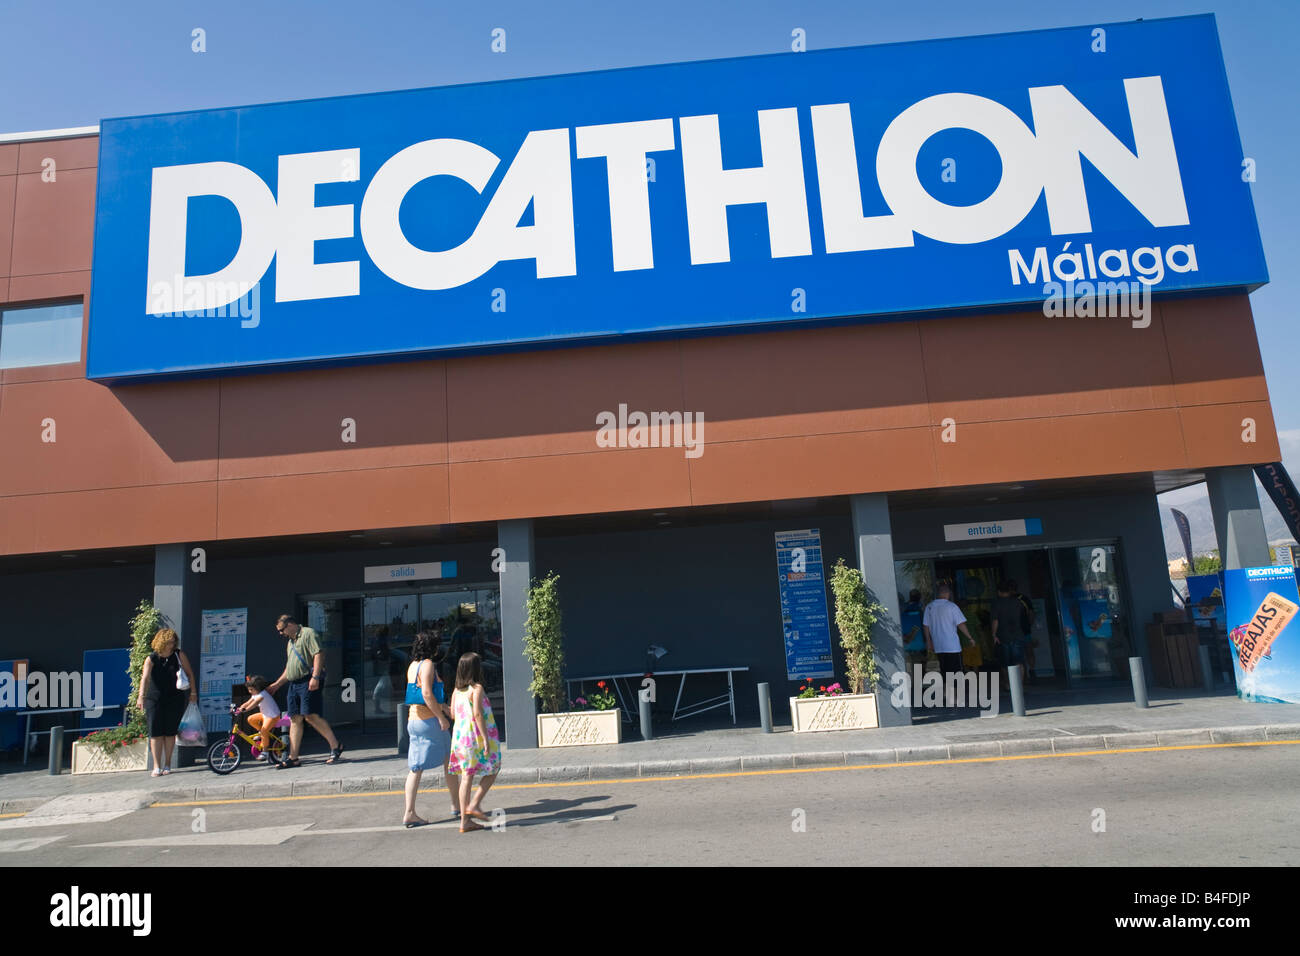 Decathlon Store High Resolution Stock Photography and Images - Alamy